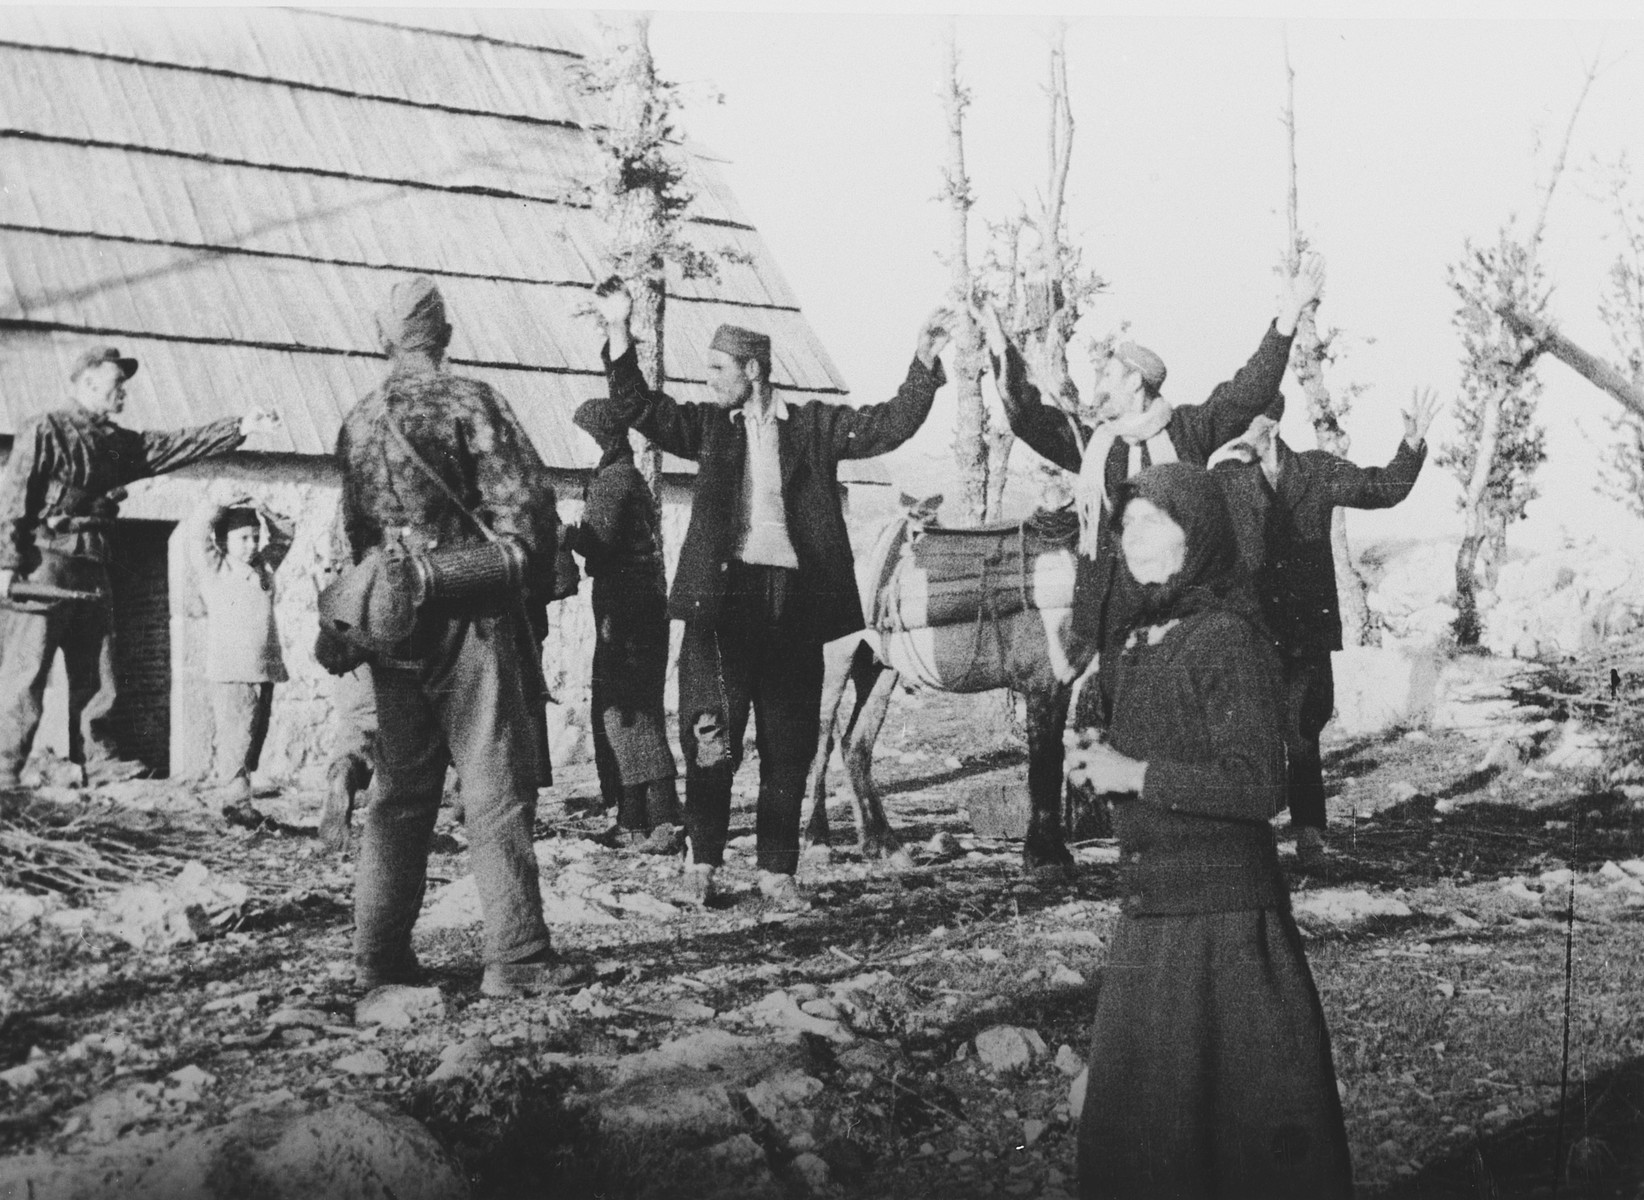 Croatian partisans surrender to German soldiers. 

The original  Waffen-SS caption reads, "Gefangene Partisanen" (captured partisans).

One of a series of photographs taken by the 7th SS Volunteer Mountain Division Prinz Eugen in Croatia, Serbia, and Montenegro from 1942 to 1944, after the German invasion of the Kingdom of Yugoslavia. The photographs are believed to have been captioned by the commanding office of the Waffen-SS, and had been in the possession of  Friedrich Wilhem Krueger, who served with the division from November 1943 until April 1944.